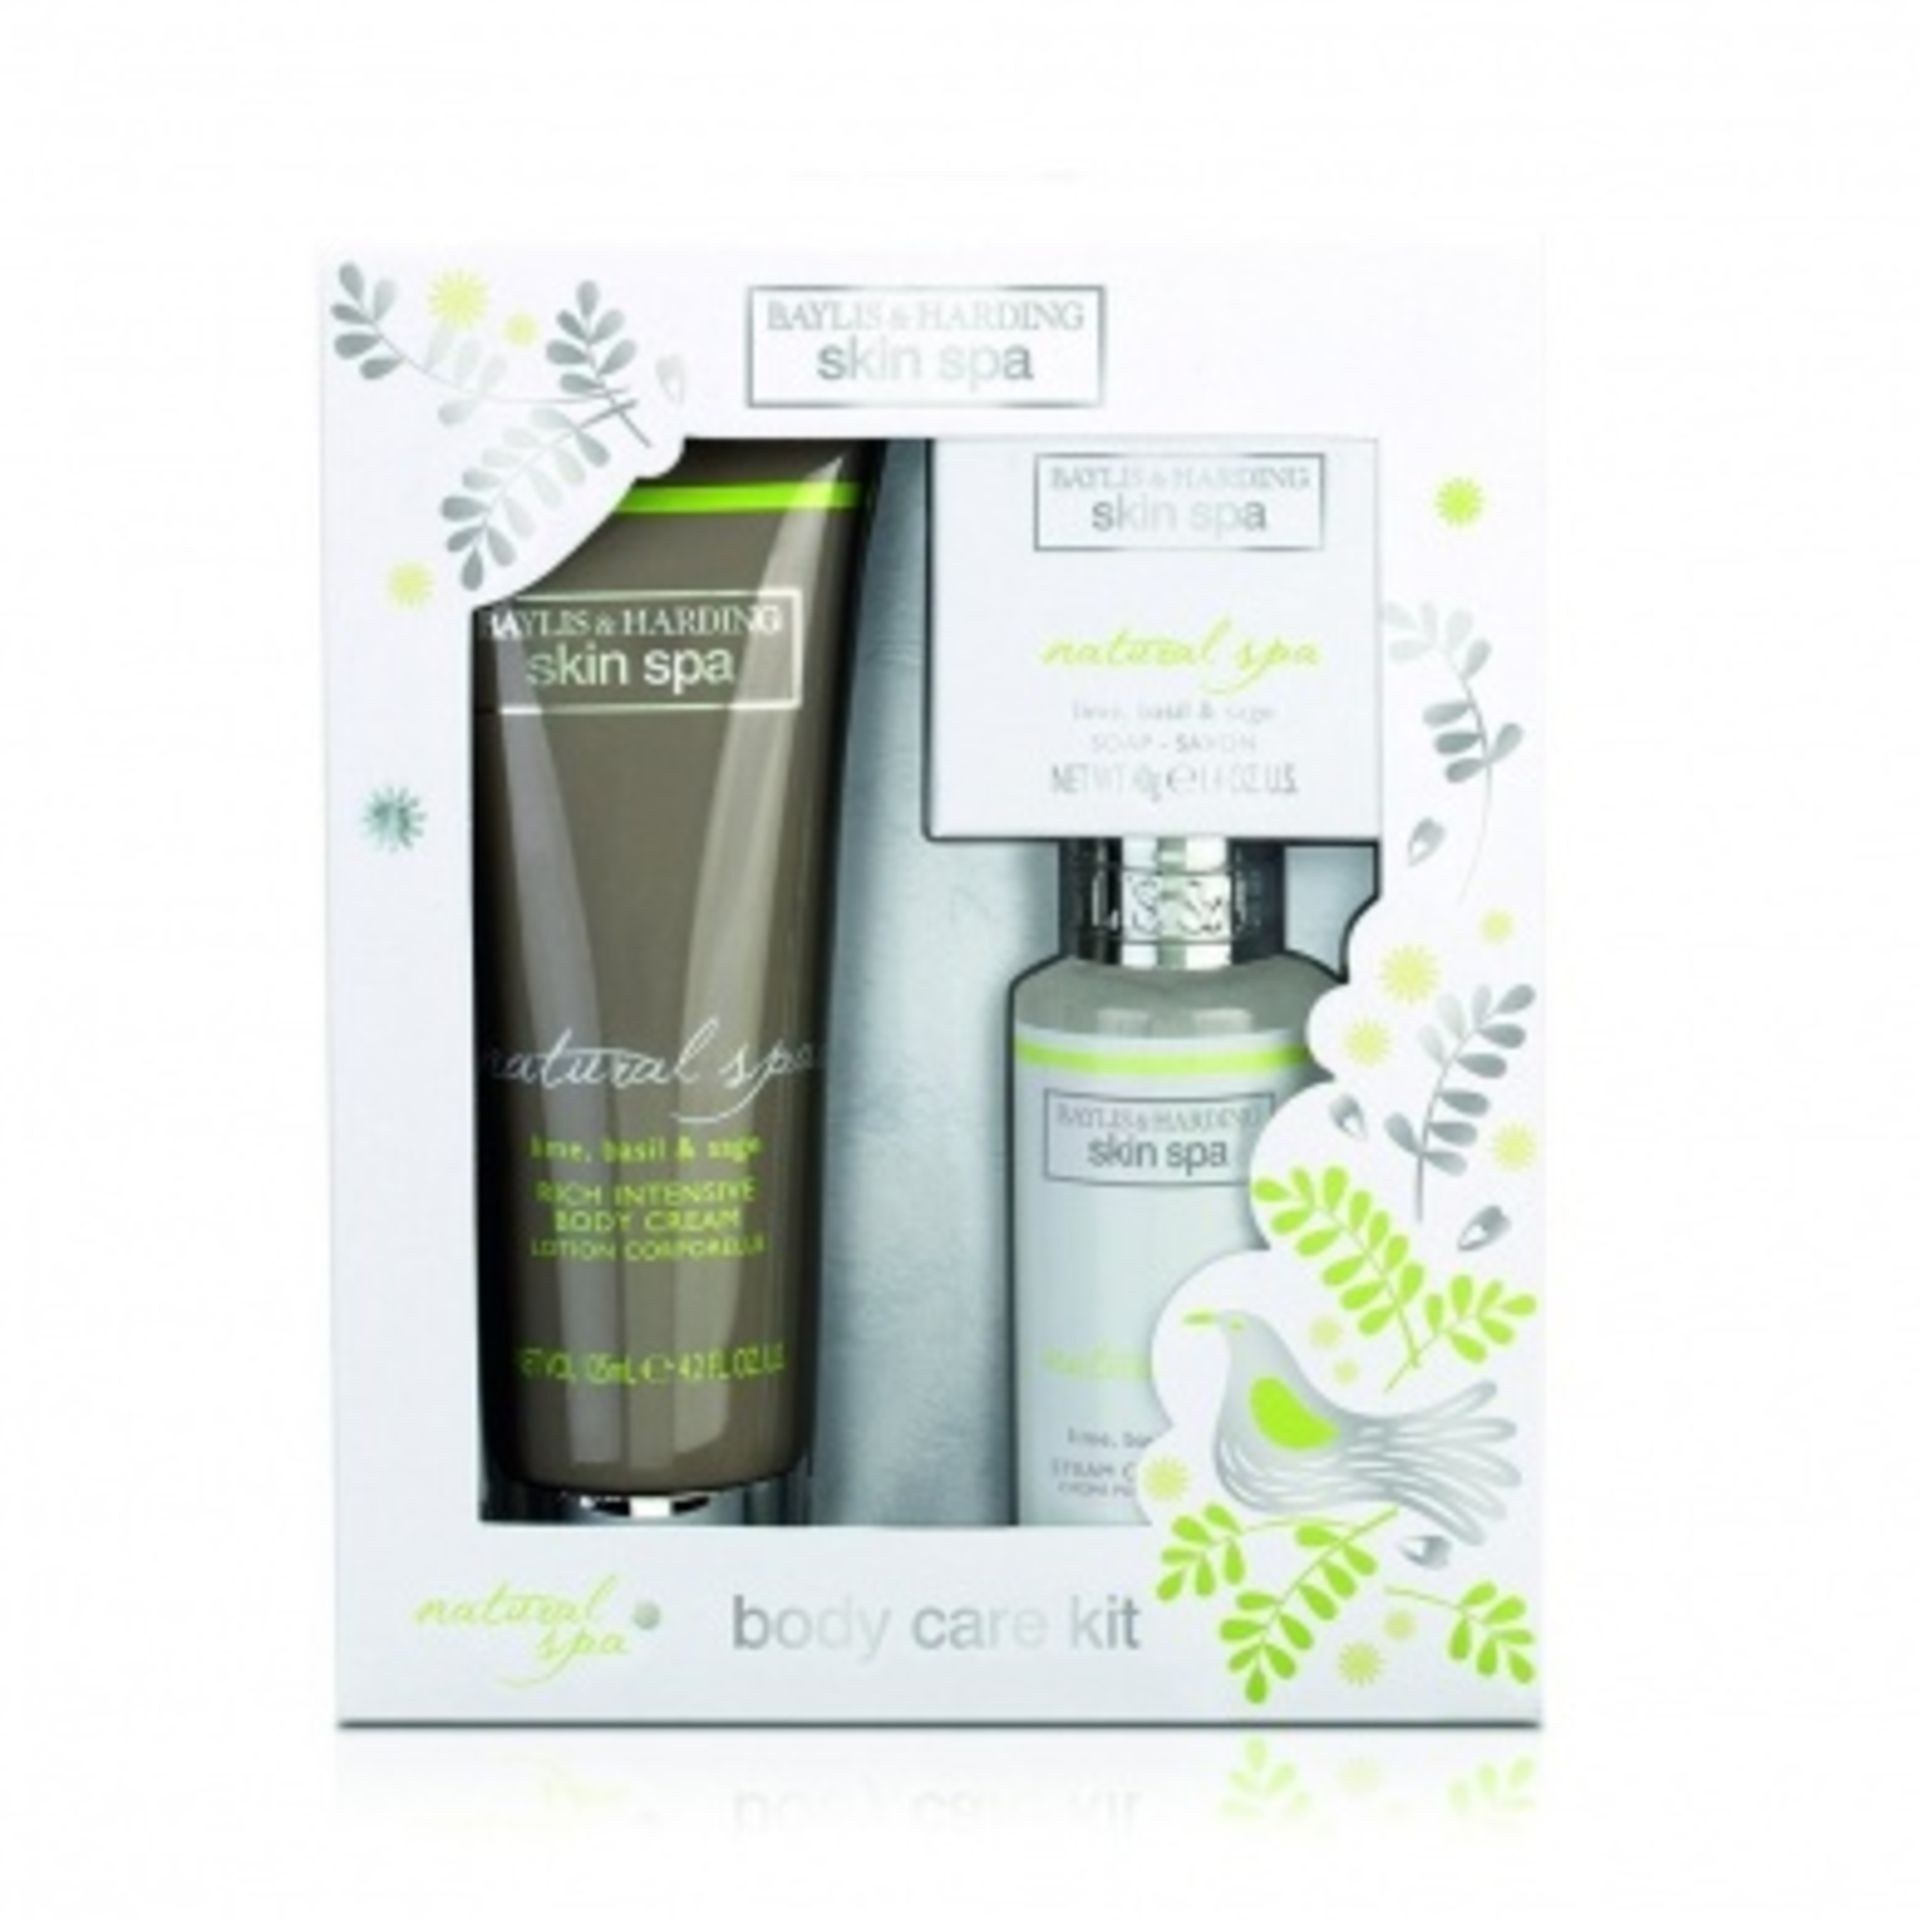 V *TRADE QTY* Brand New Six Gift Sets - Baylis and Harding Skin Spa Trio Including 125ml Body - Image 2 of 2